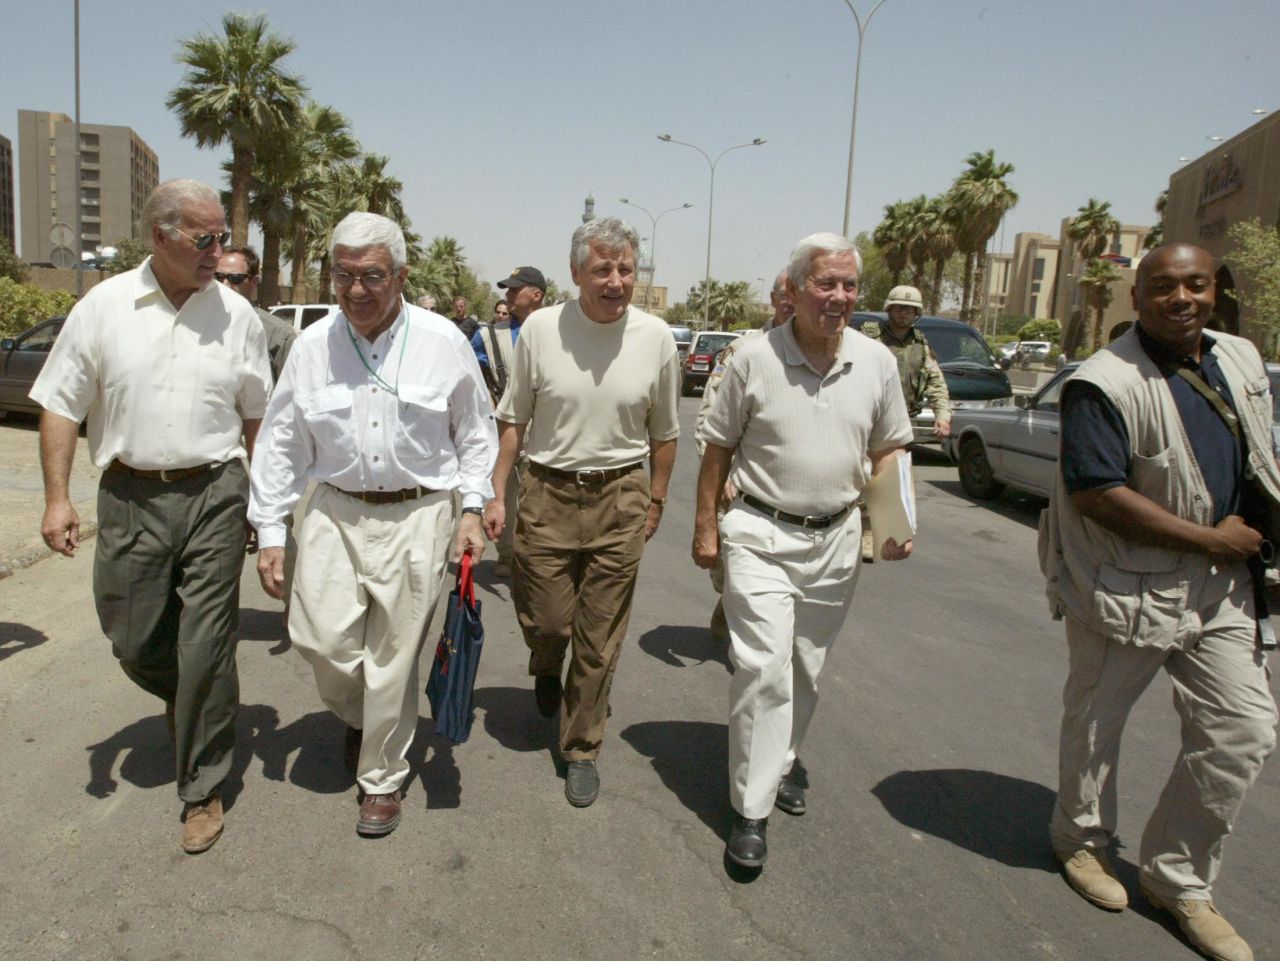 Joe Biden, left, then a U.S. senator from Delaware, walks with Sen. Richard Lugar, second from right, and Hagel, center, at a hotel in Baghdad in June 2003. The congressional delegation was on a tour of the Iraqi capital the year the Iraq War began. 